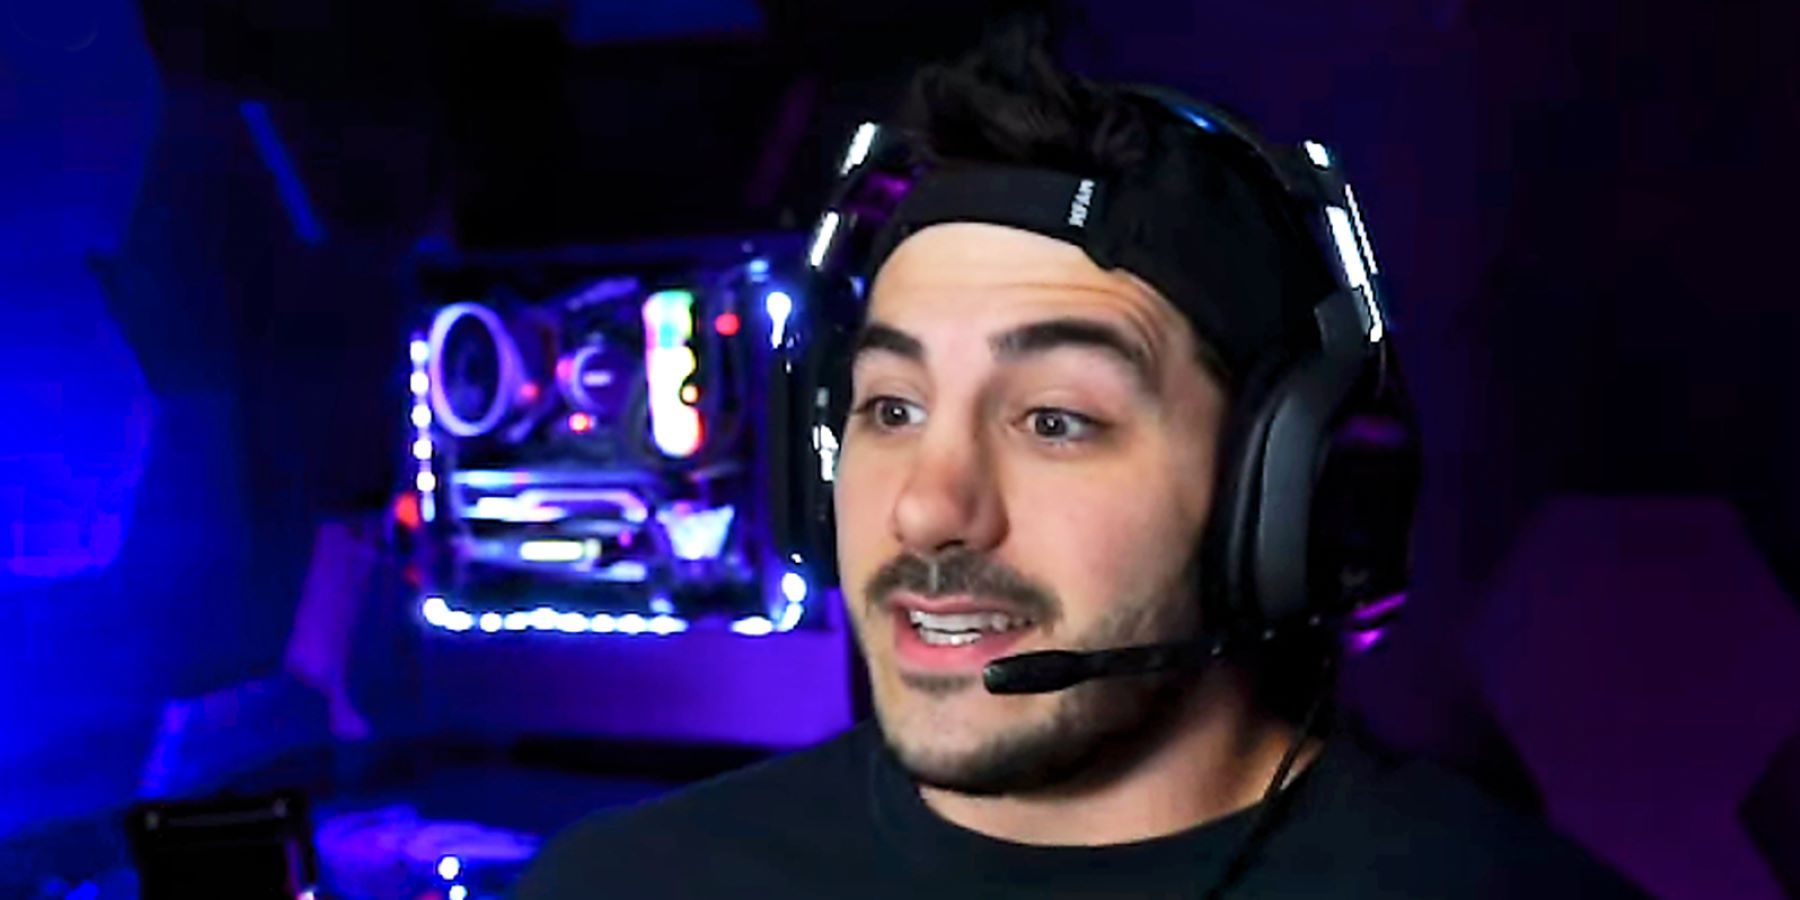 NICKMERCS wearing a headset and speaking to his Twitch stream with LED lights in the background